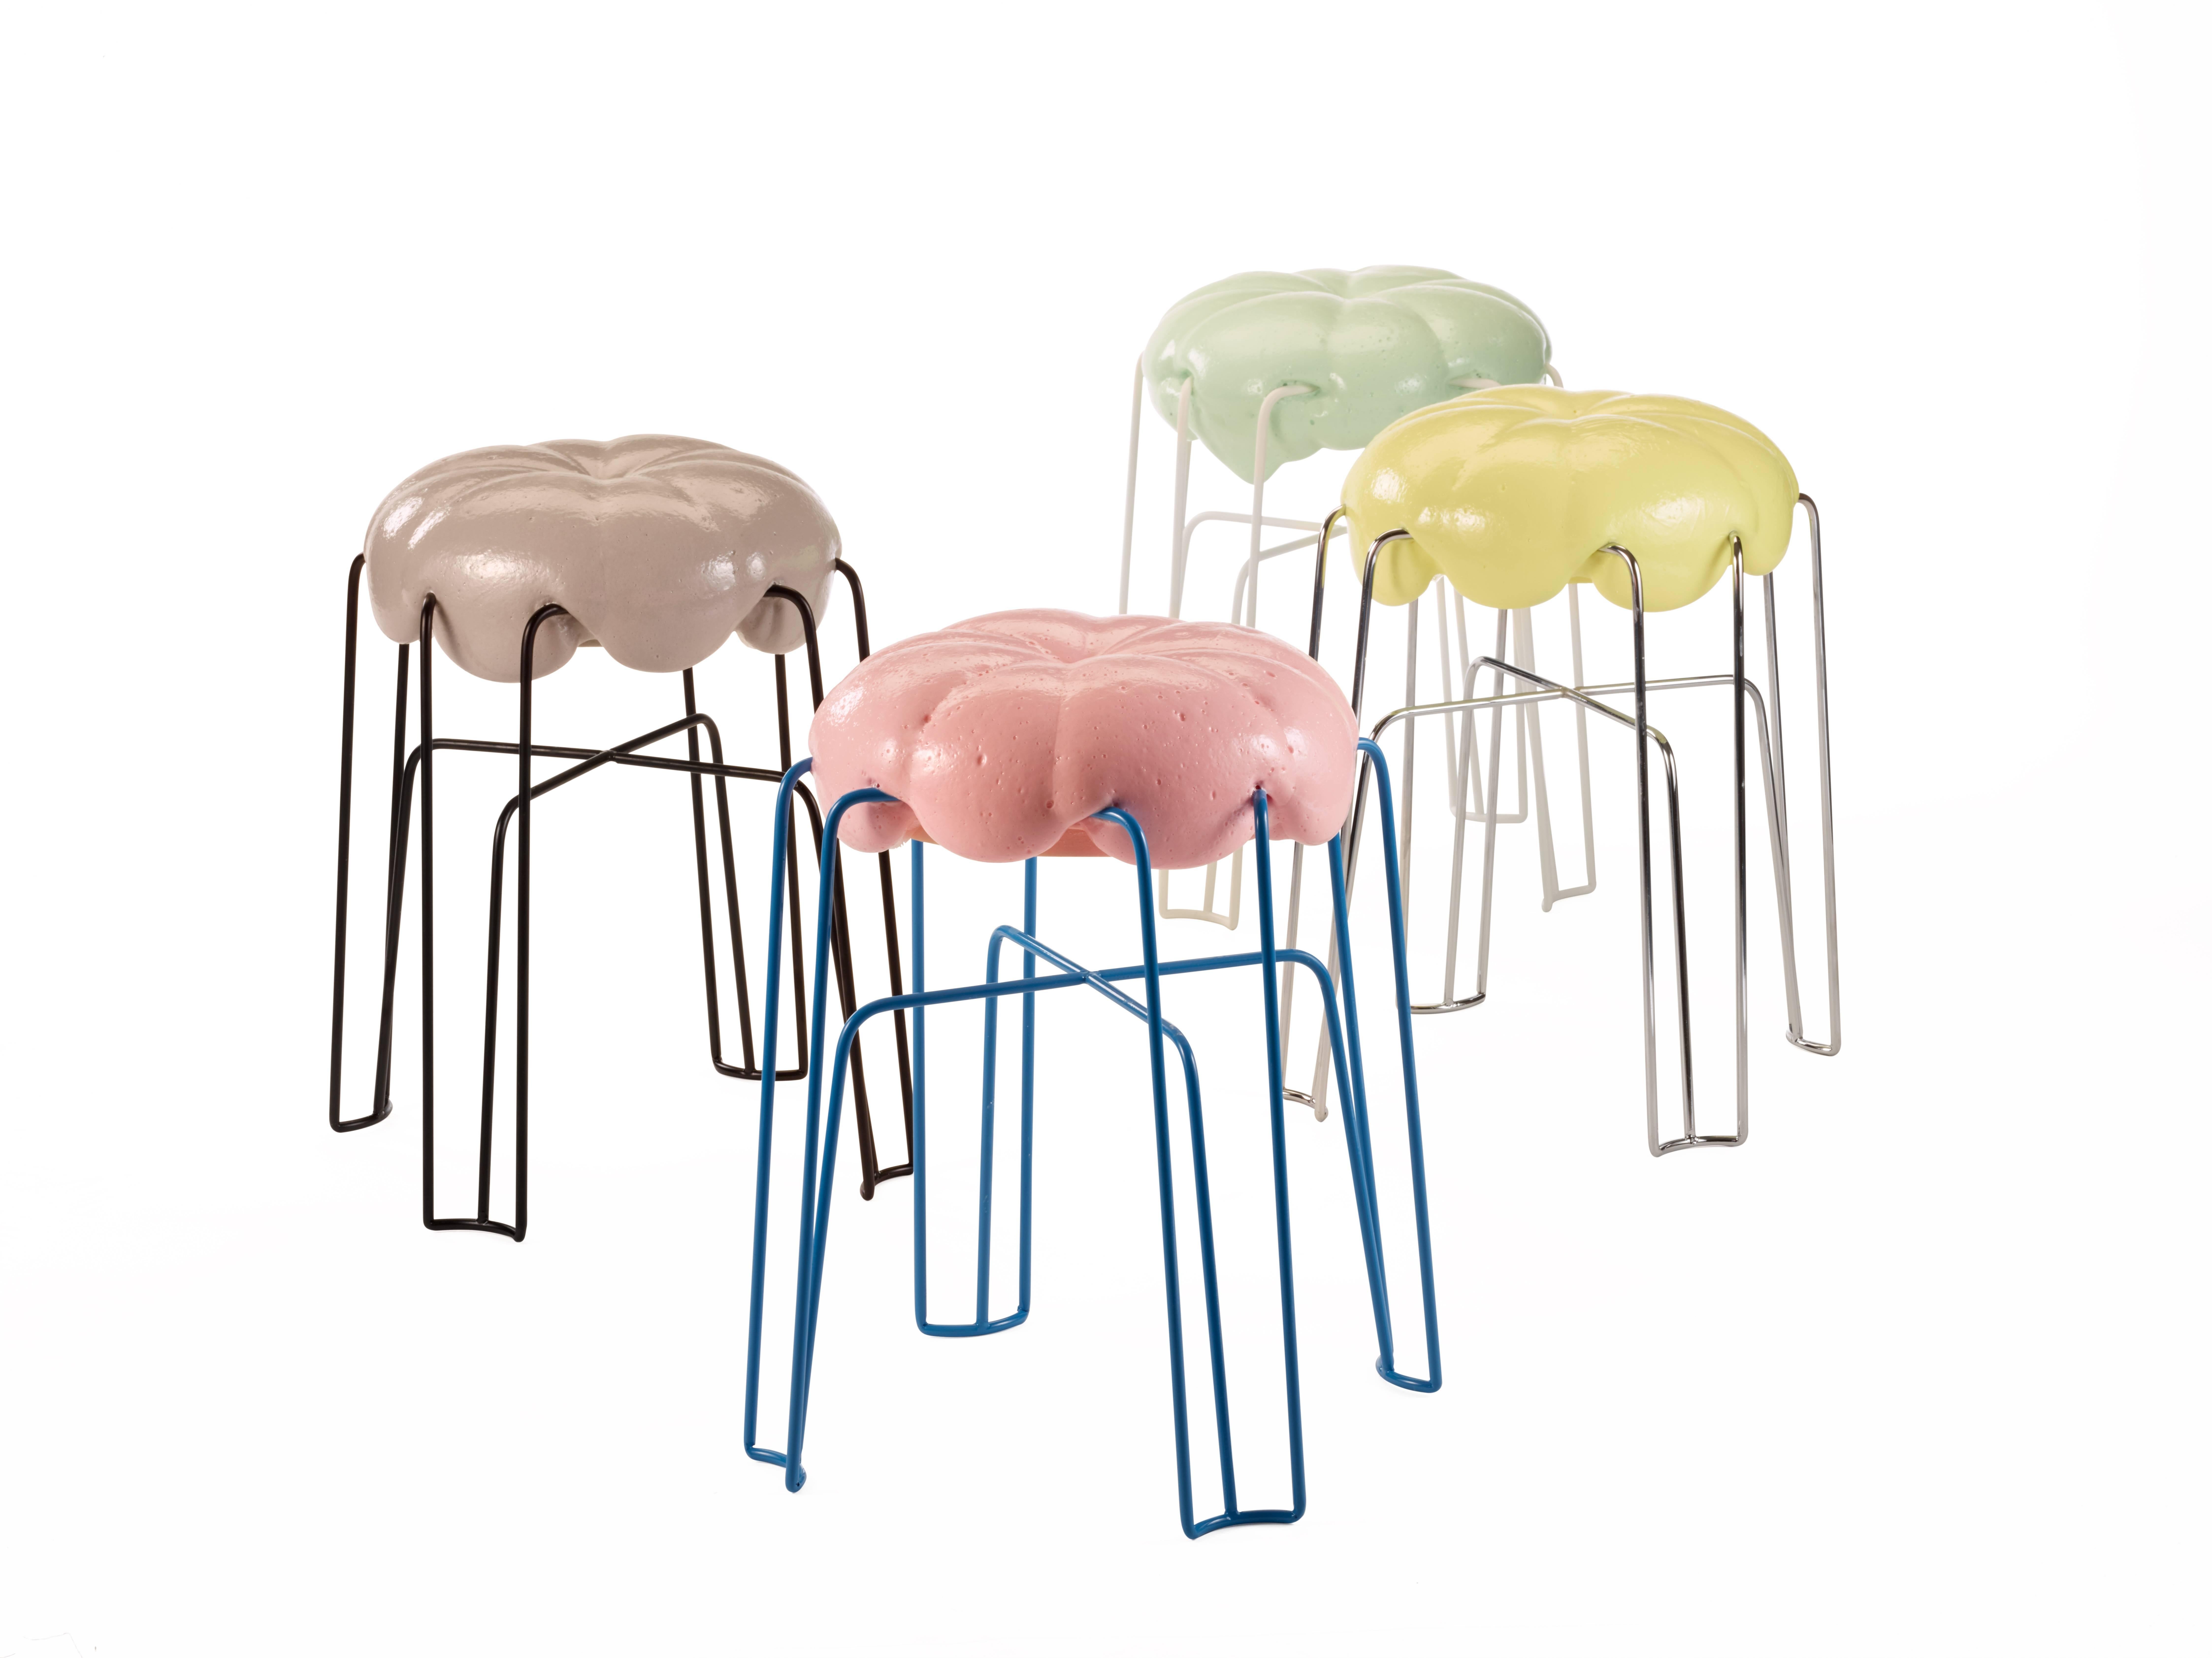 Marshmallow stool by Paul Ketz in Plum polyurethane foam and steel.

Designed by Paul Ketz
Contemporary, Germany, 2018
Polyurethane foam (non-toxic, UV stabile), steel
Measures: H 19.25 inches, W 14.5 inches, D 14.5 inches.

Each stool is